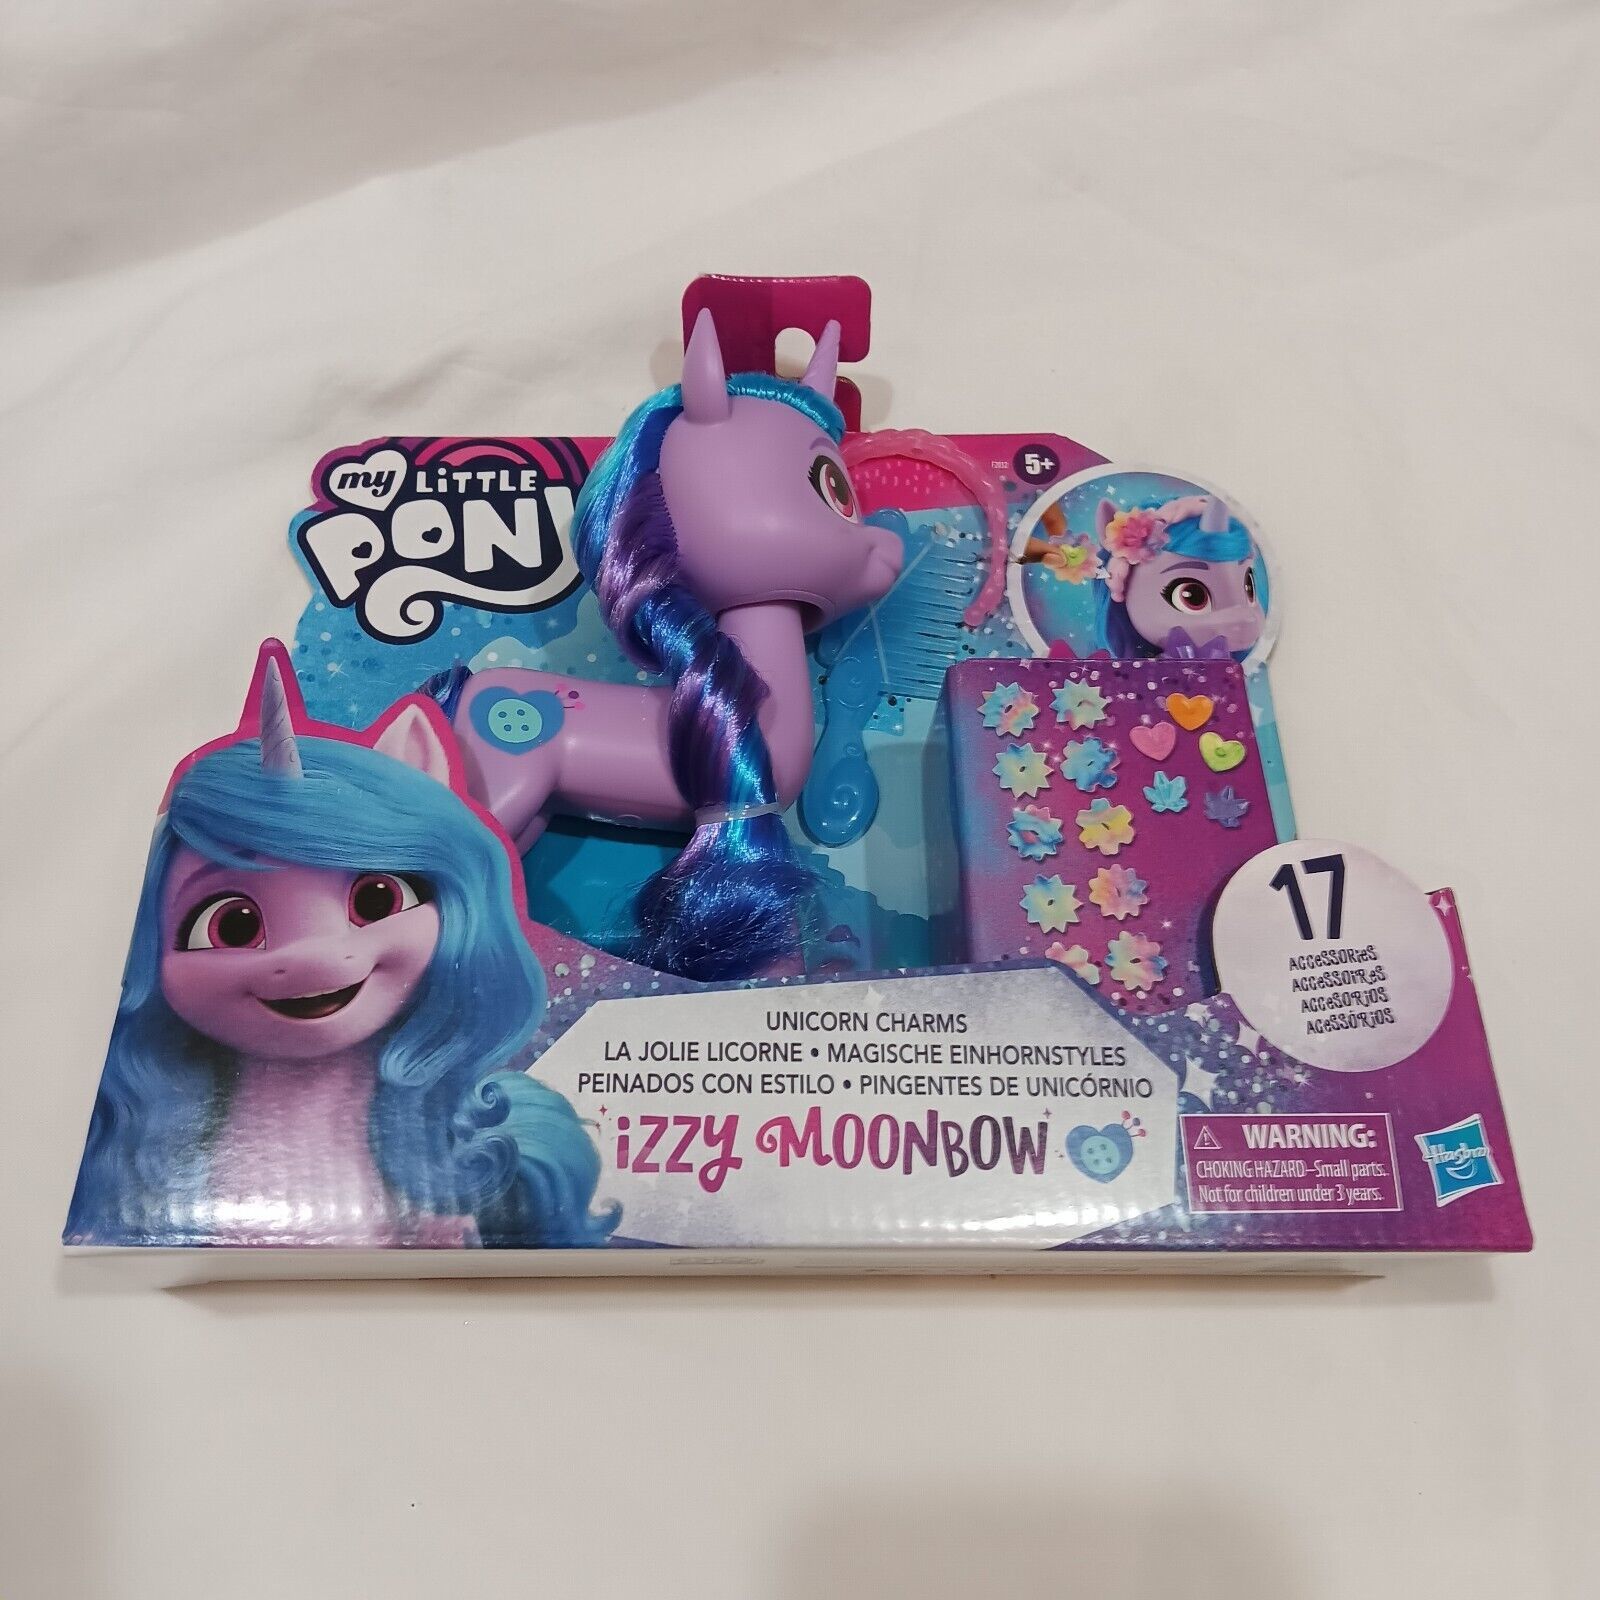 Primary image for MY LITTLE PONY IZZY MOONBOW FIGURE A NEW GENERATION 17 UNICORN CHARMS ~NEW